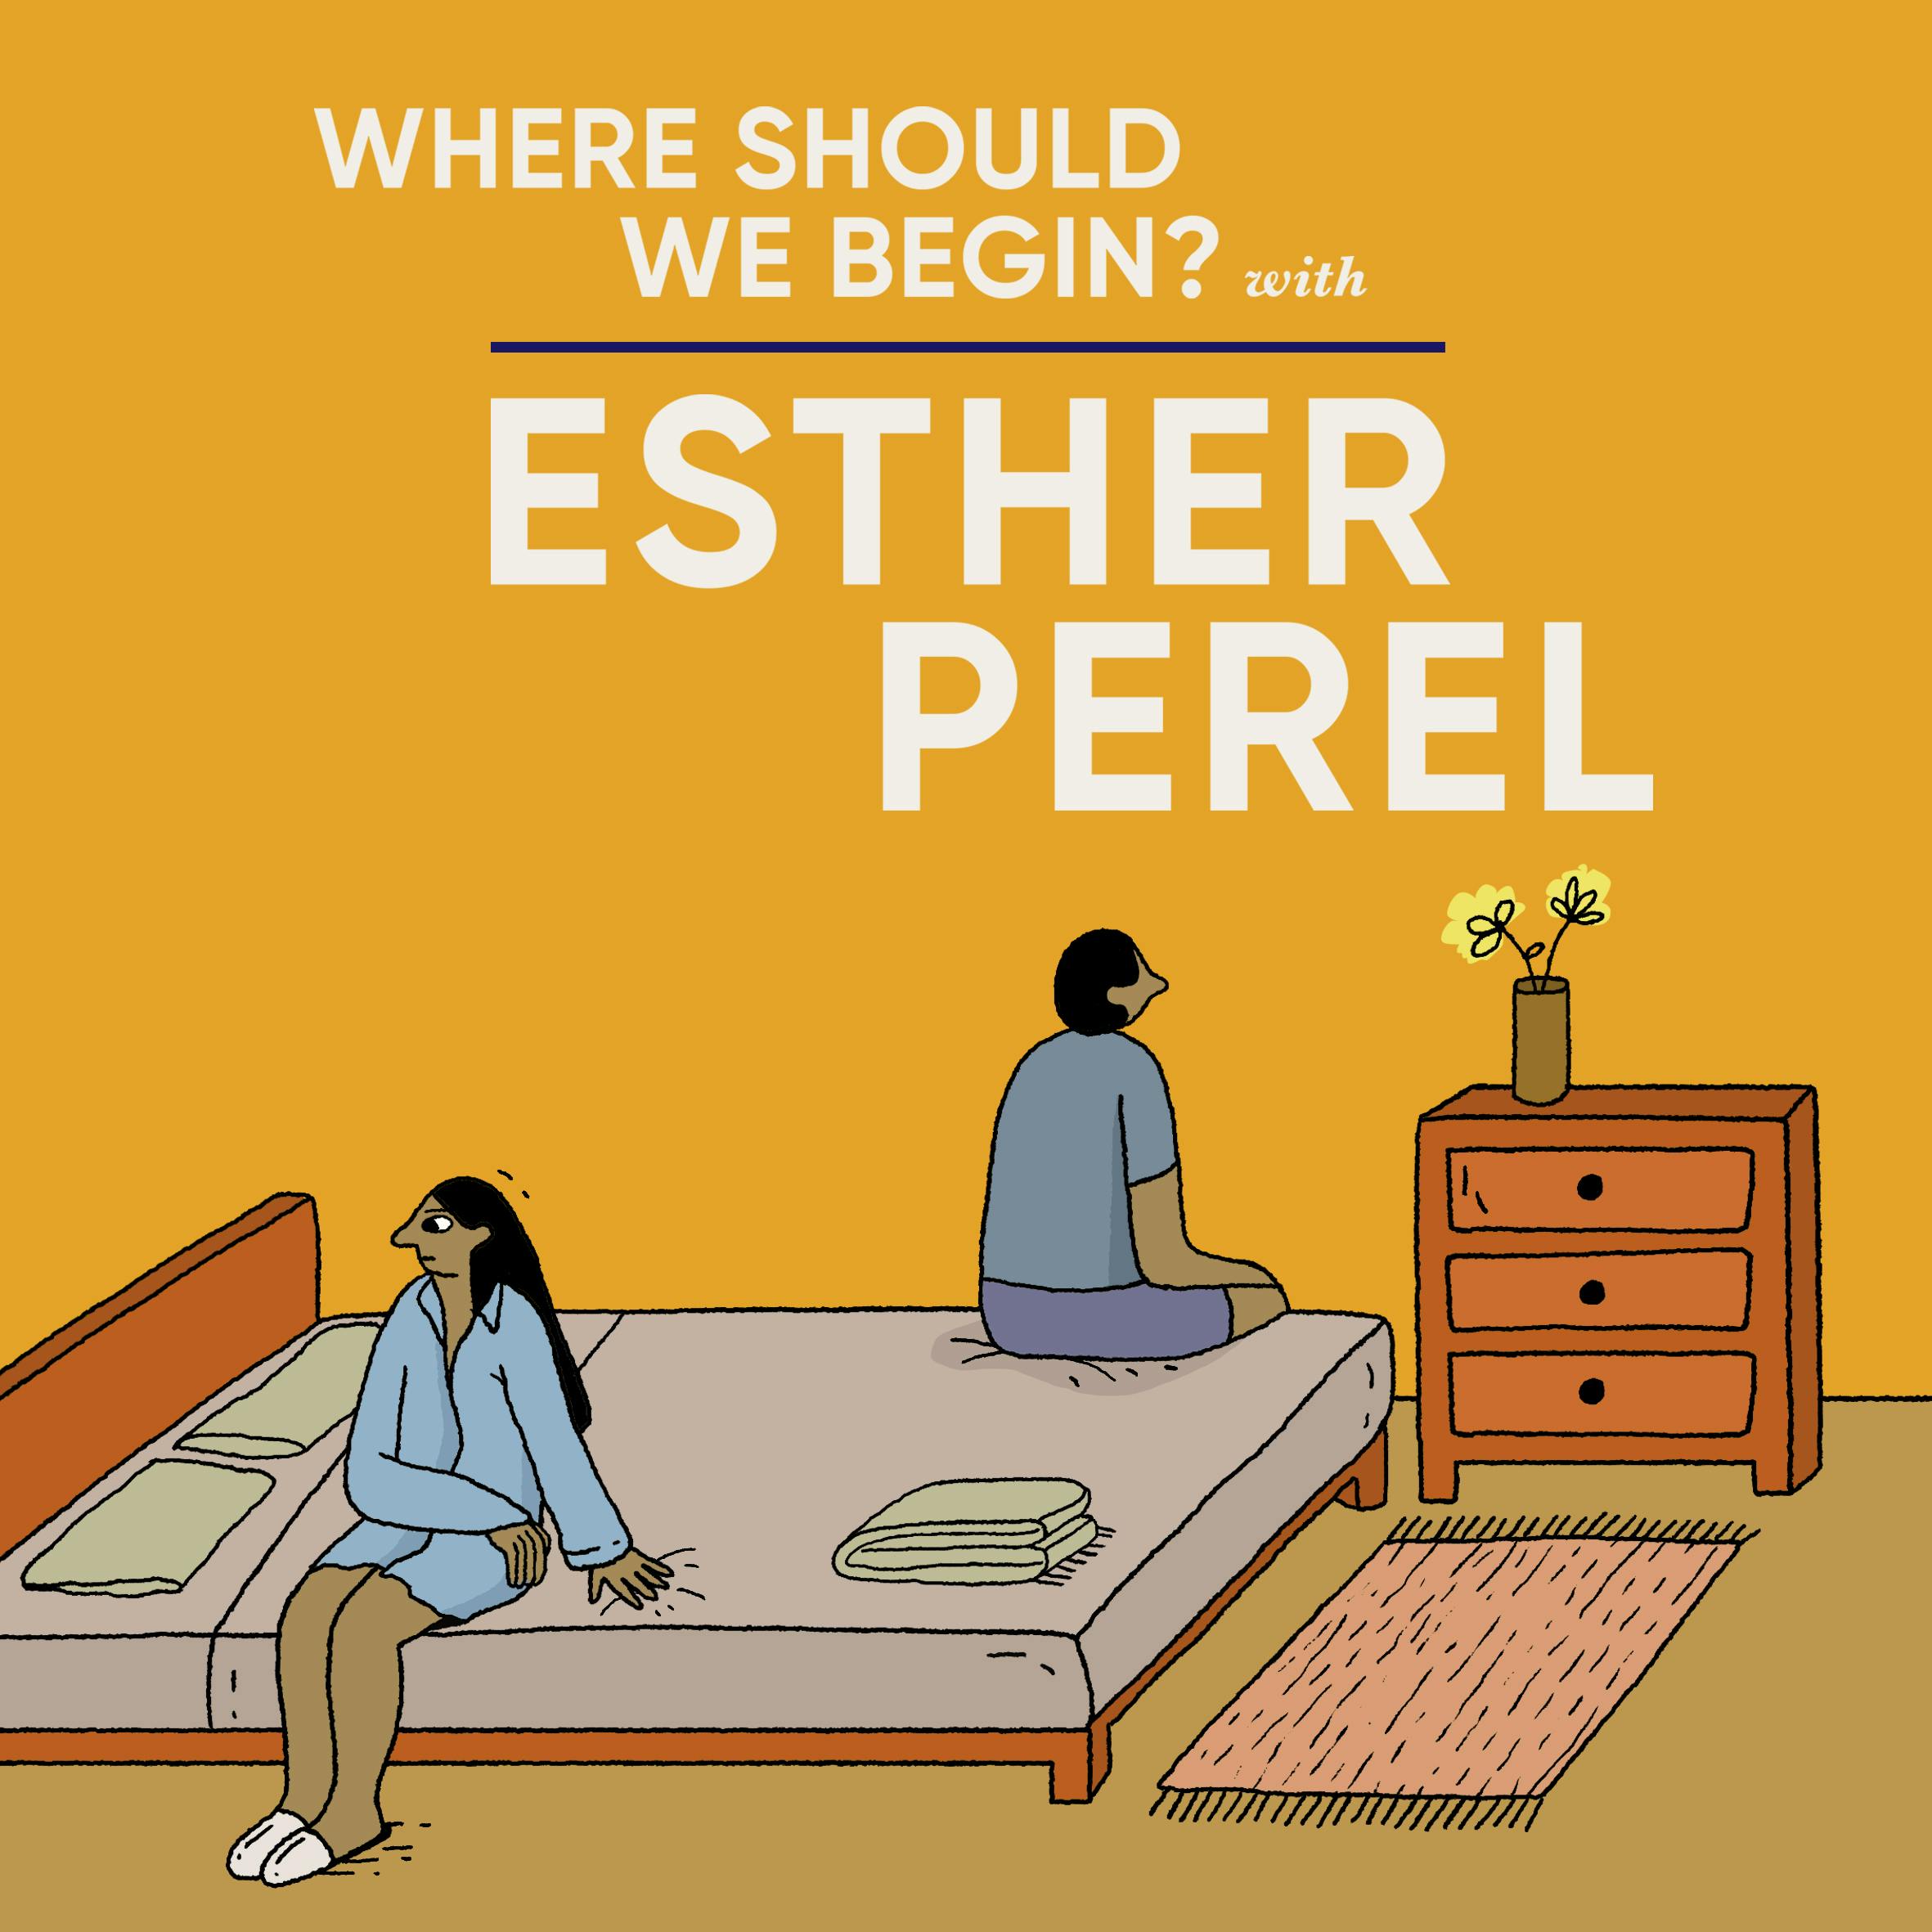 He Wants it Everyday, She Wants it Never by Esther Perel Global Media